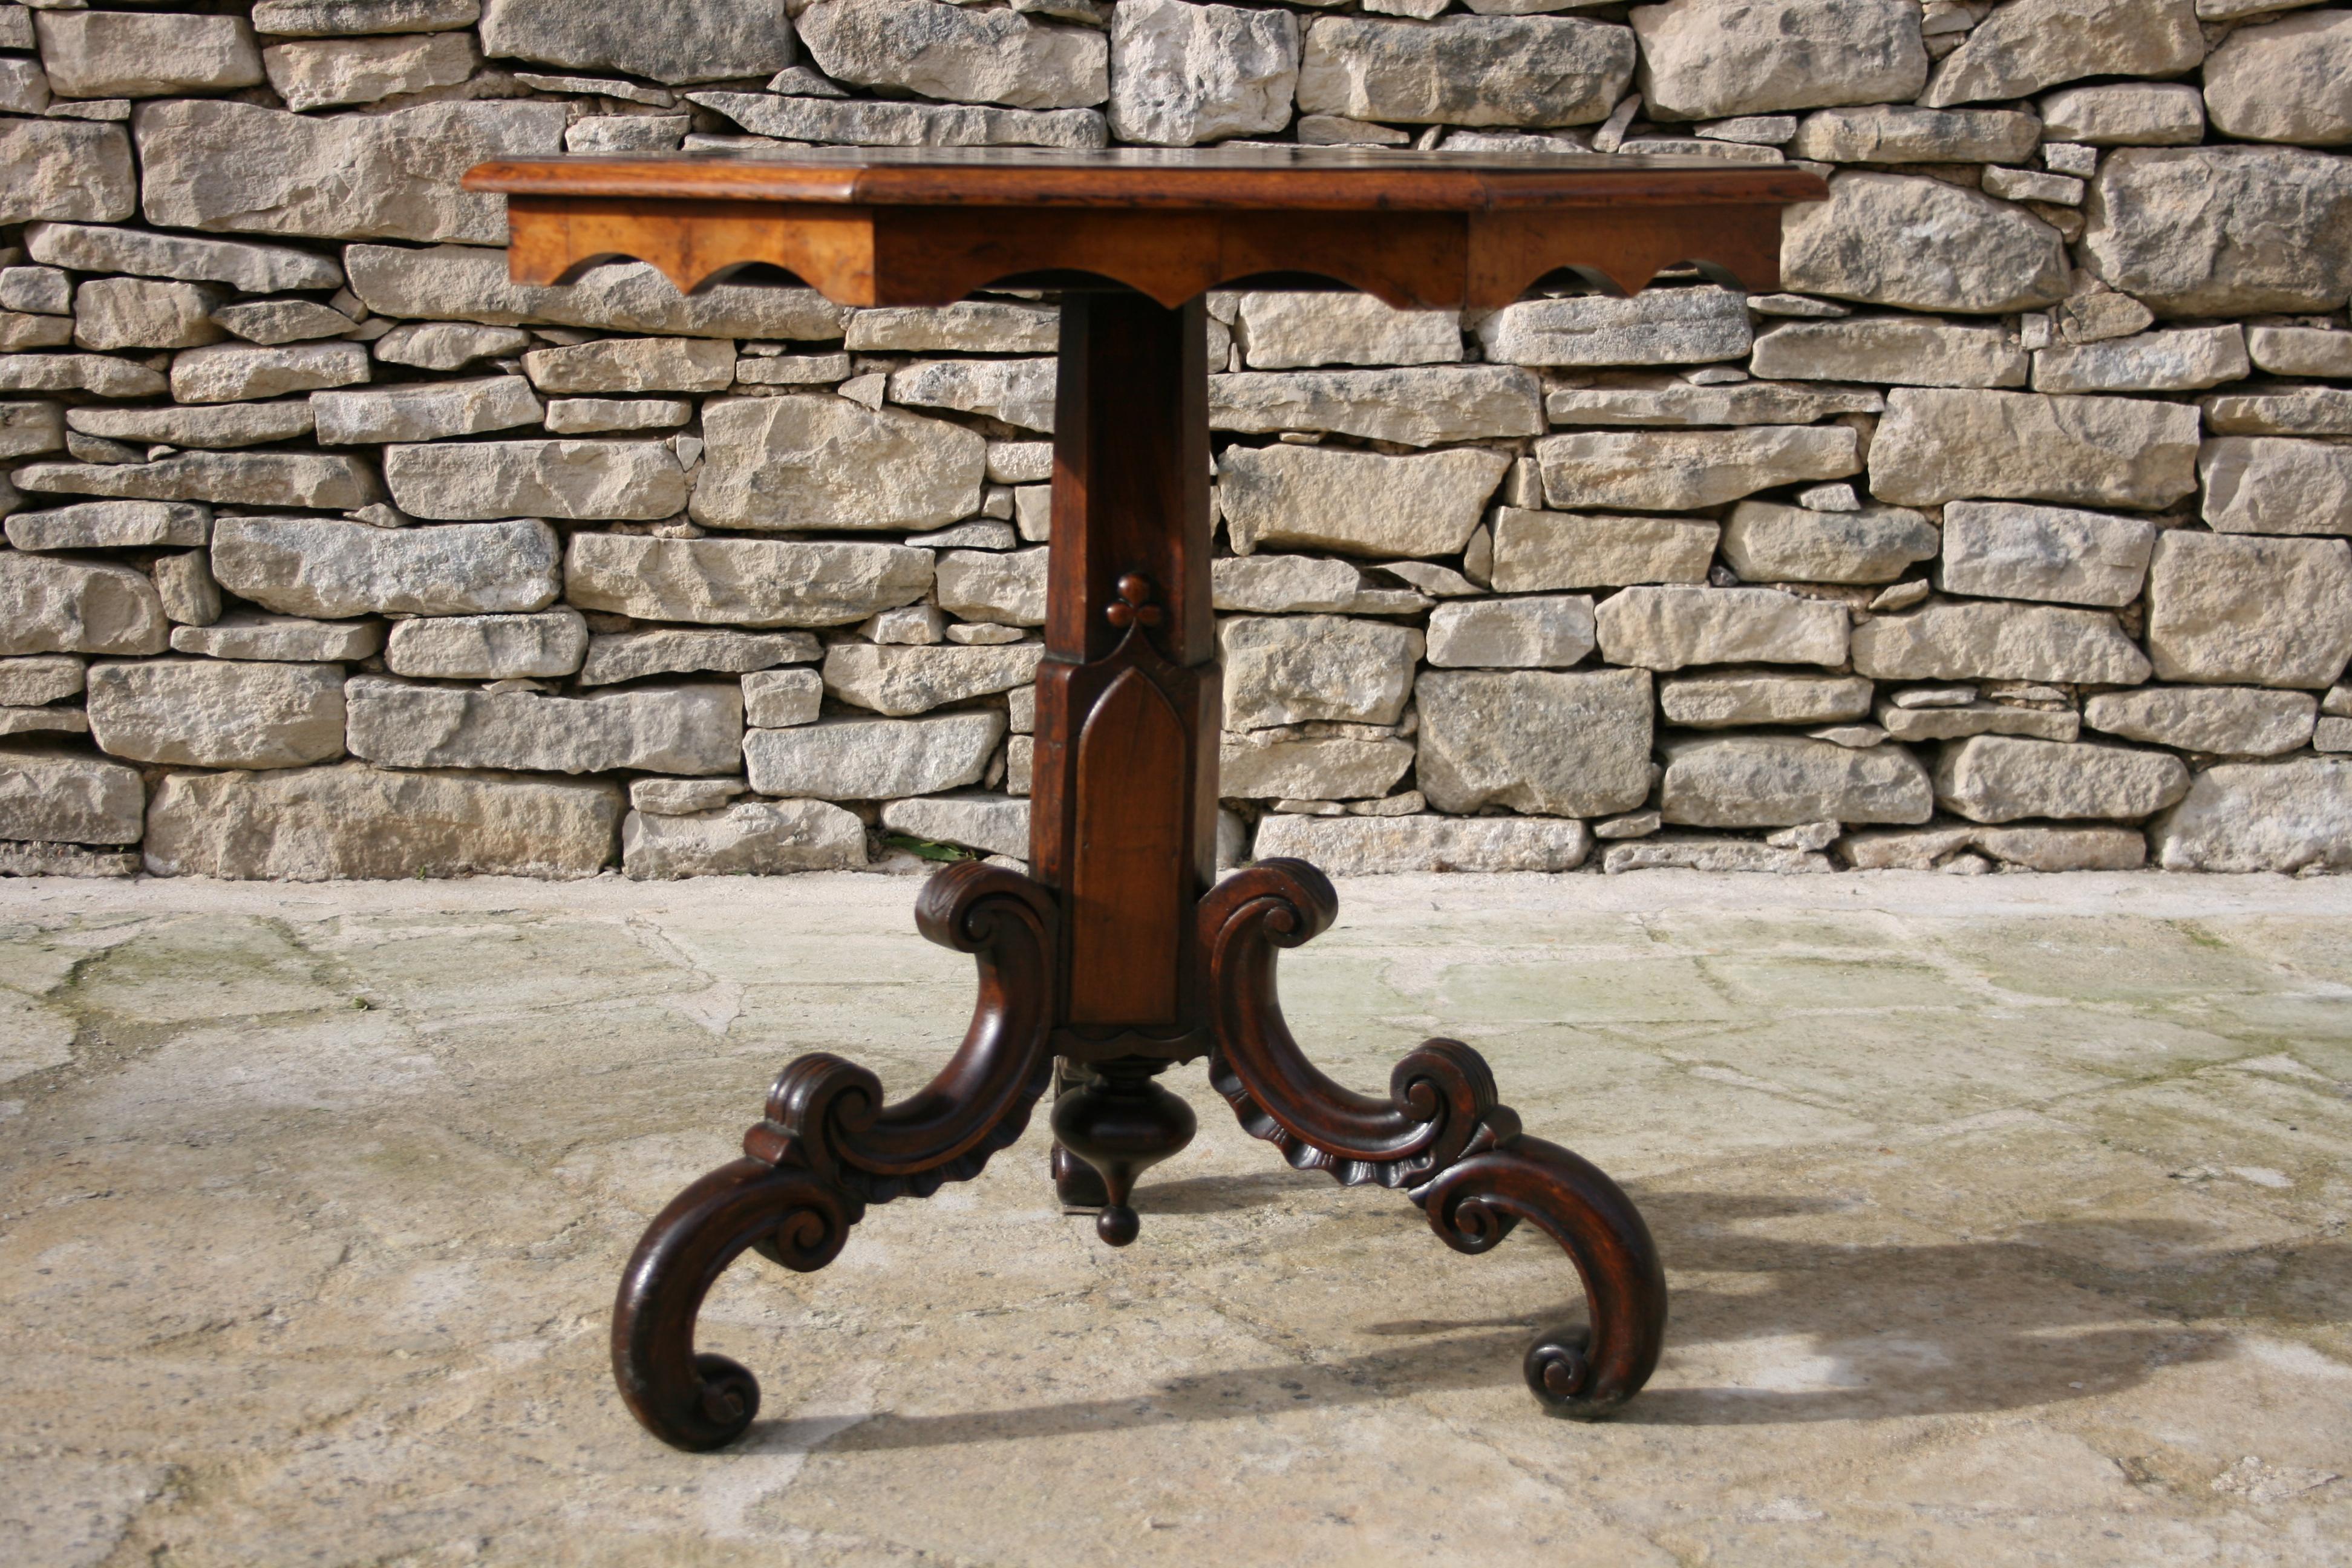 Impressive 19th century Italian pedestal table with flamed veneer inlay decoration and carved detailing to the base.